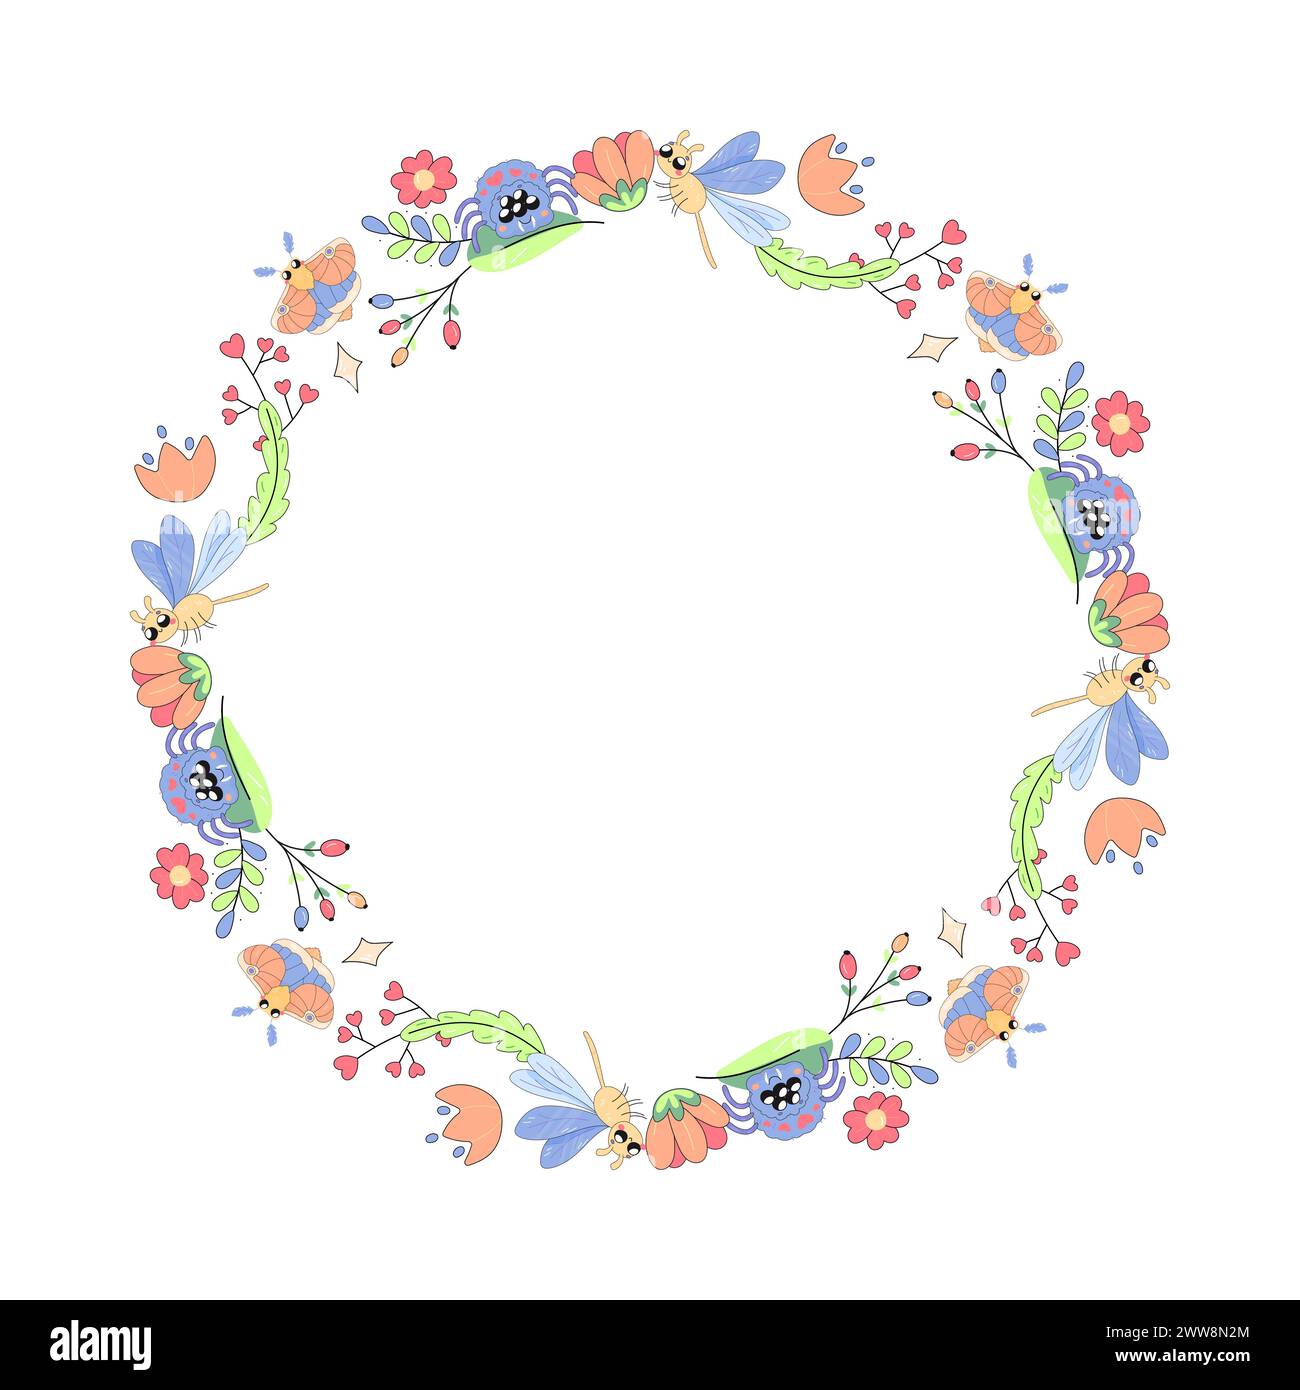 Congratulations frame, with flowers, plants and maple moth, butterfly insects. on white Stock Vector